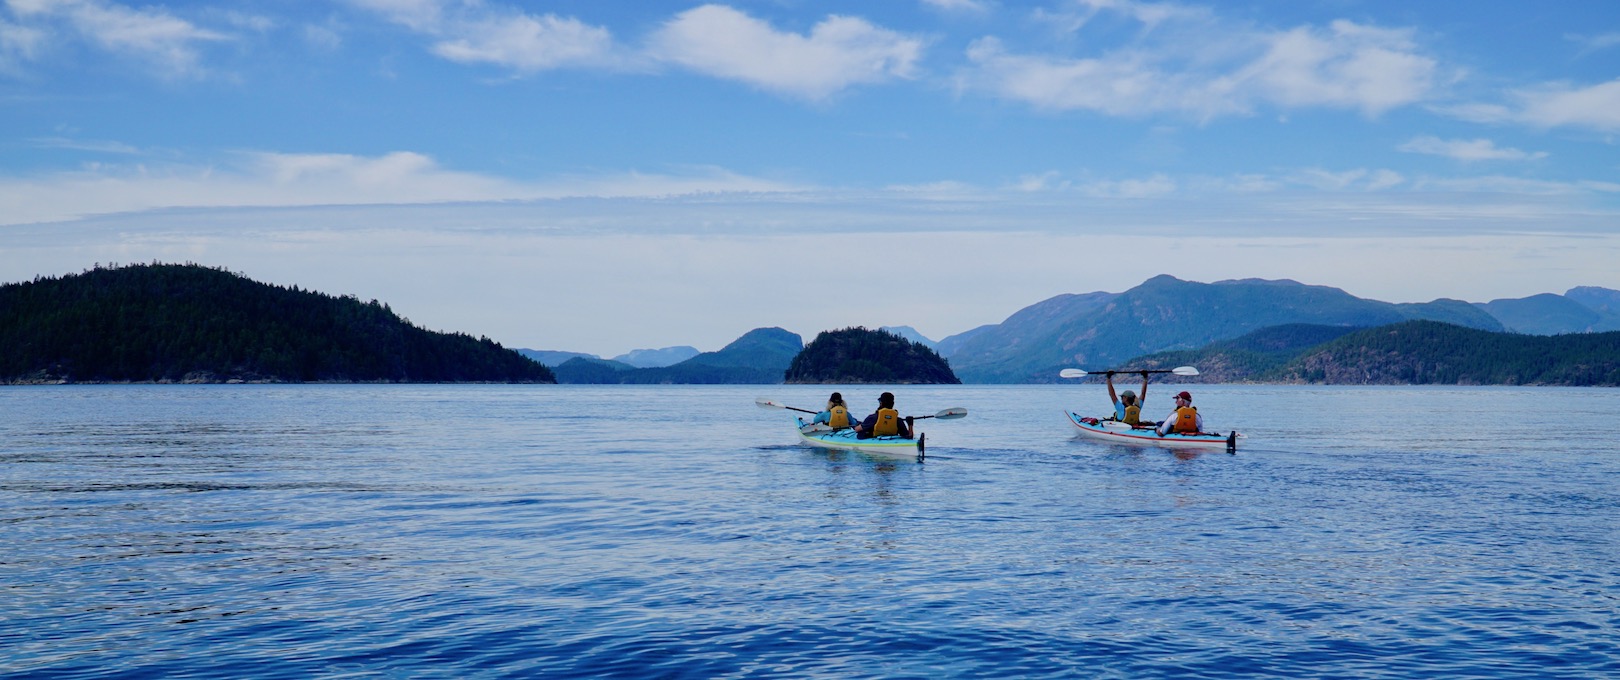 Two double kayakers and four guests paddling towards Kinghorn Island in Desolation Sound